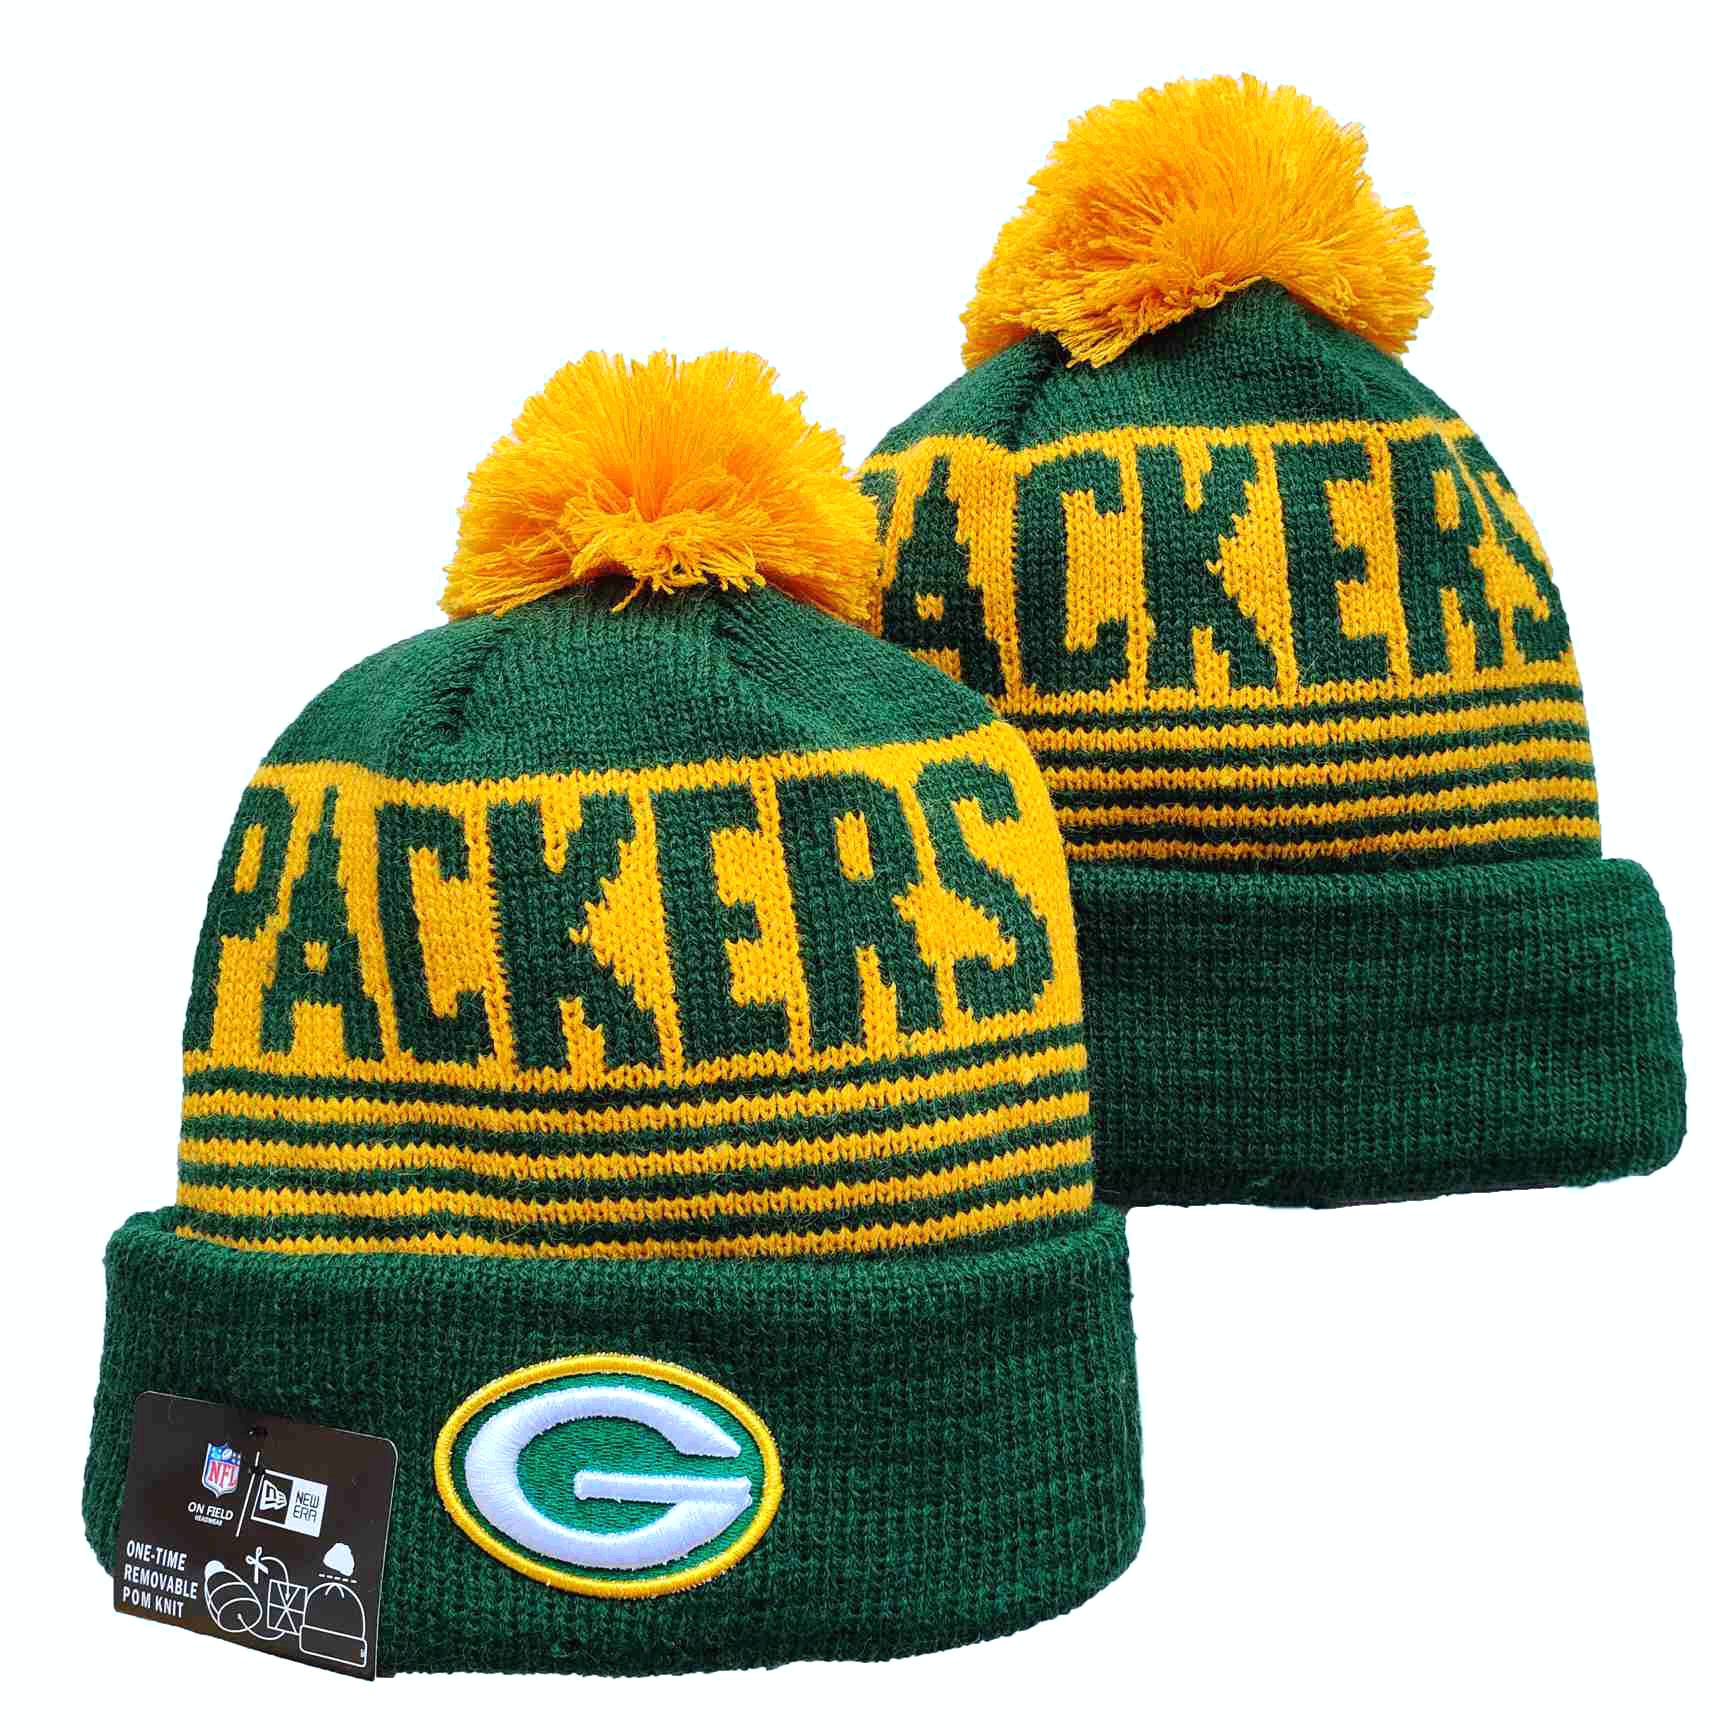 NFL Green Bay Packers Beanies Knit Hats-YD1185